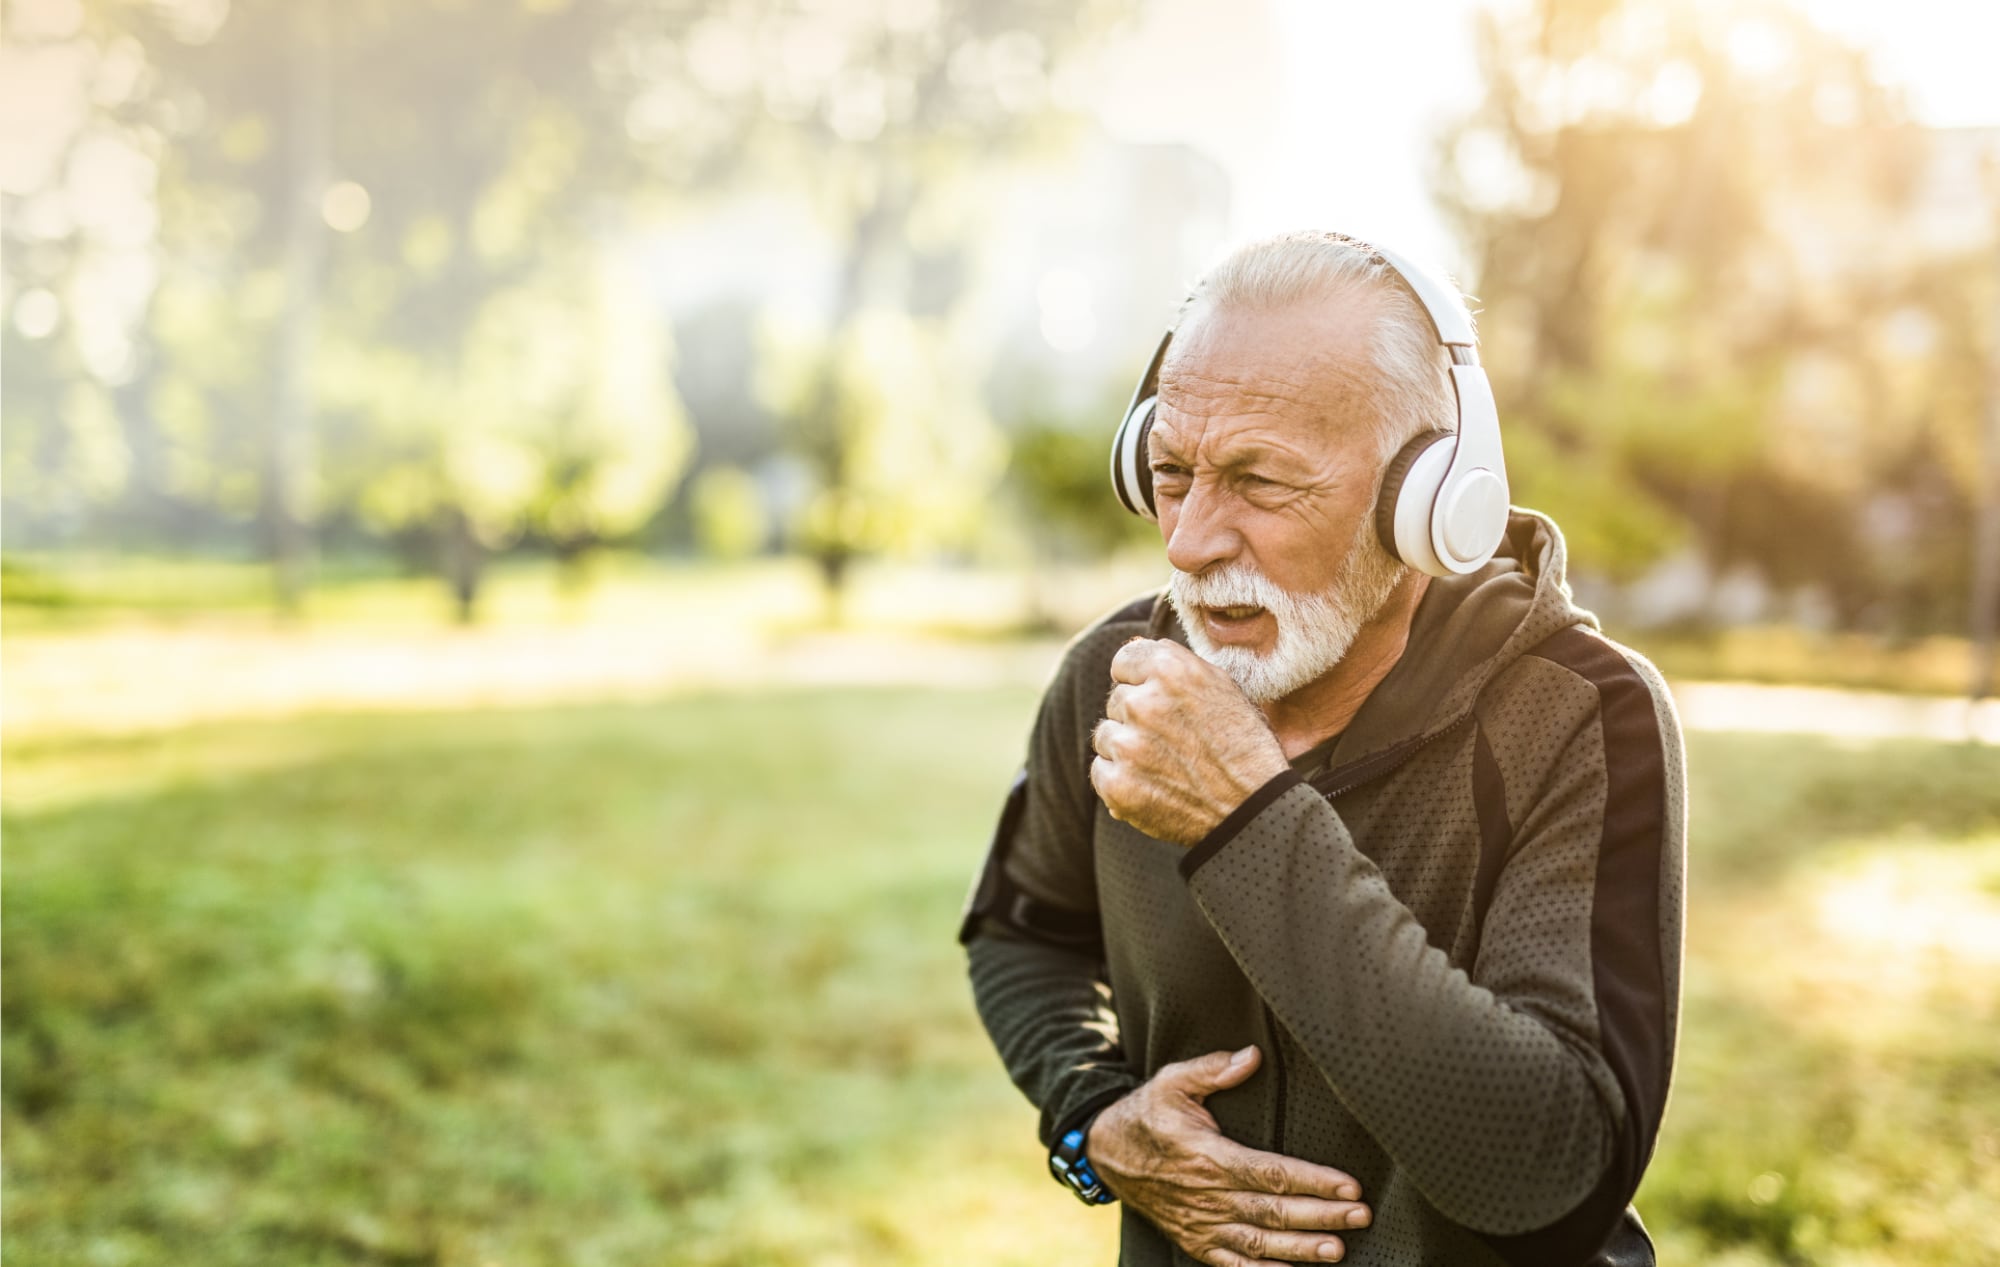 Senior man with headphones while jogging in a park coughs into his hand.